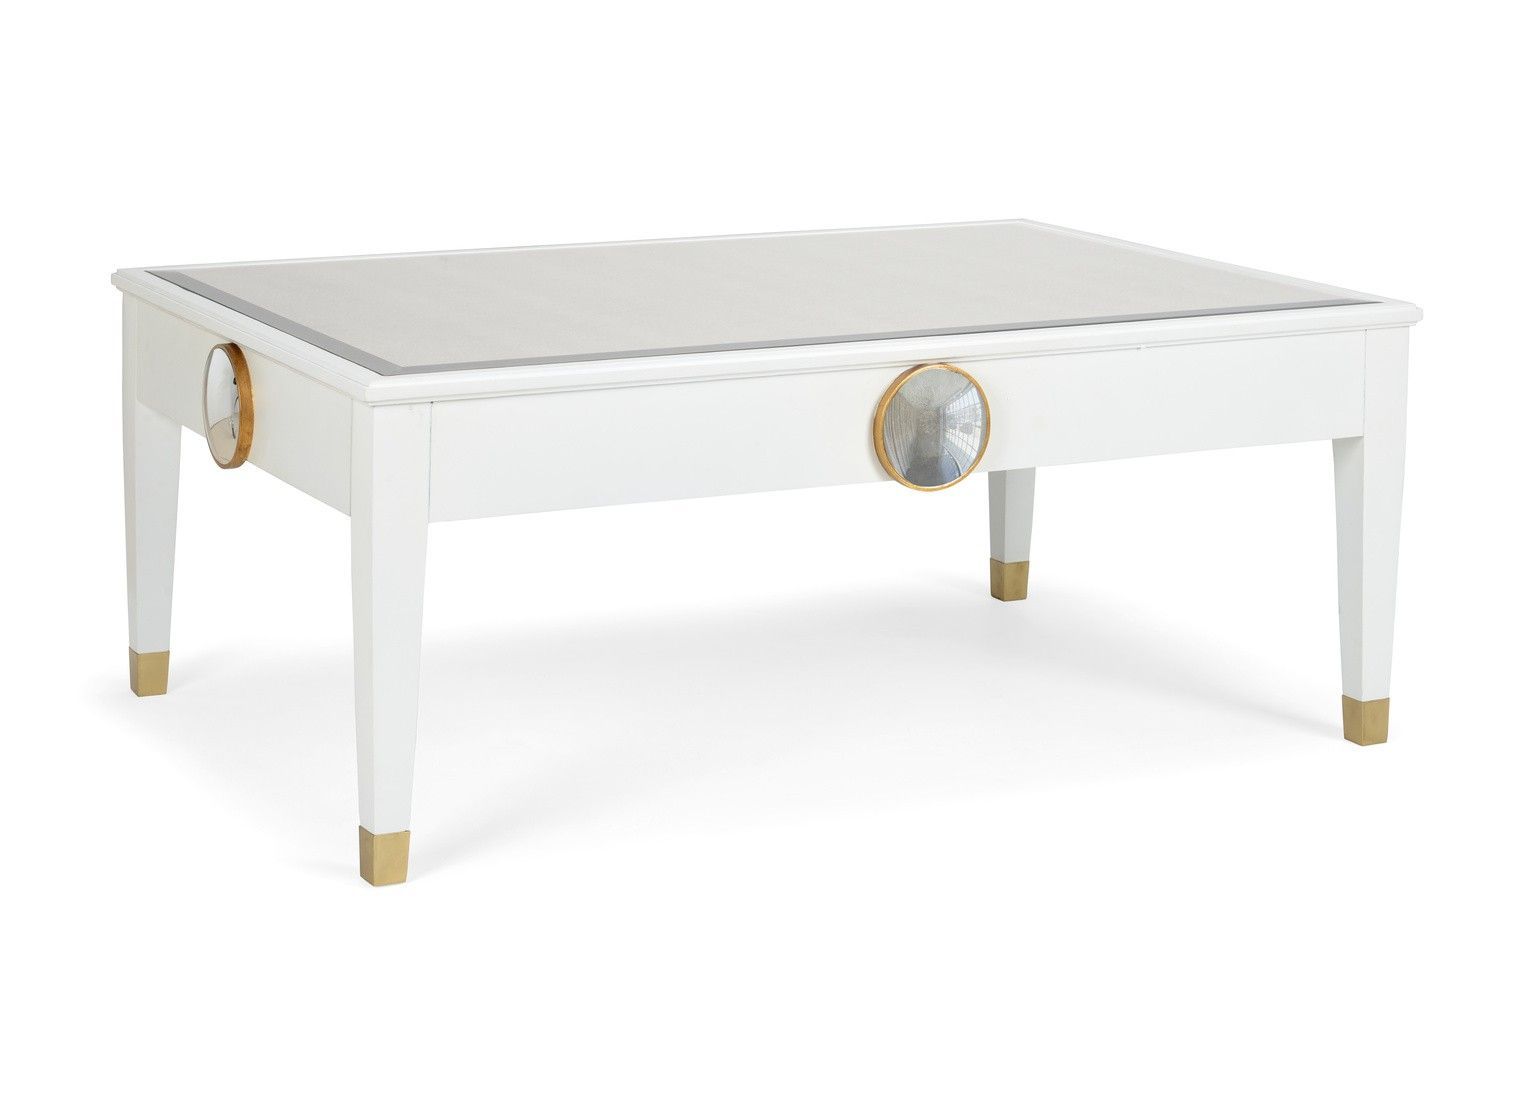 White Cocktail Table With Brass Edged Mirror Accent And Pertaining To Antique Mirror Cocktail Tables (View 10 of 15)